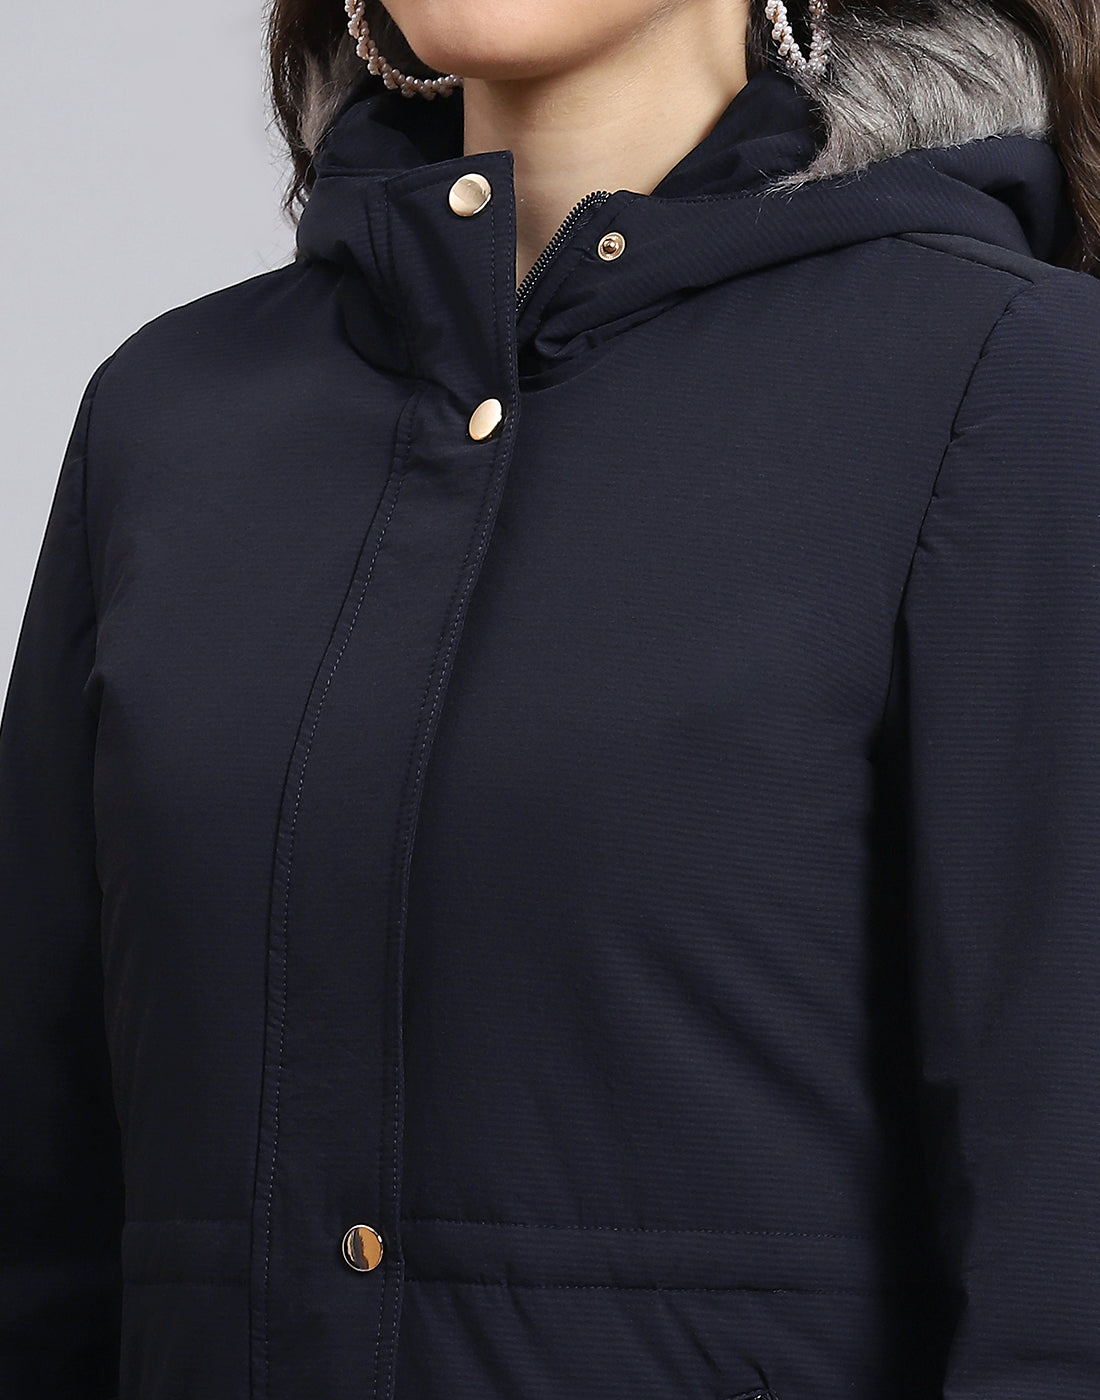 Women Navy Blue Hooded Jacket with Attached Inflatable Neck Pillow